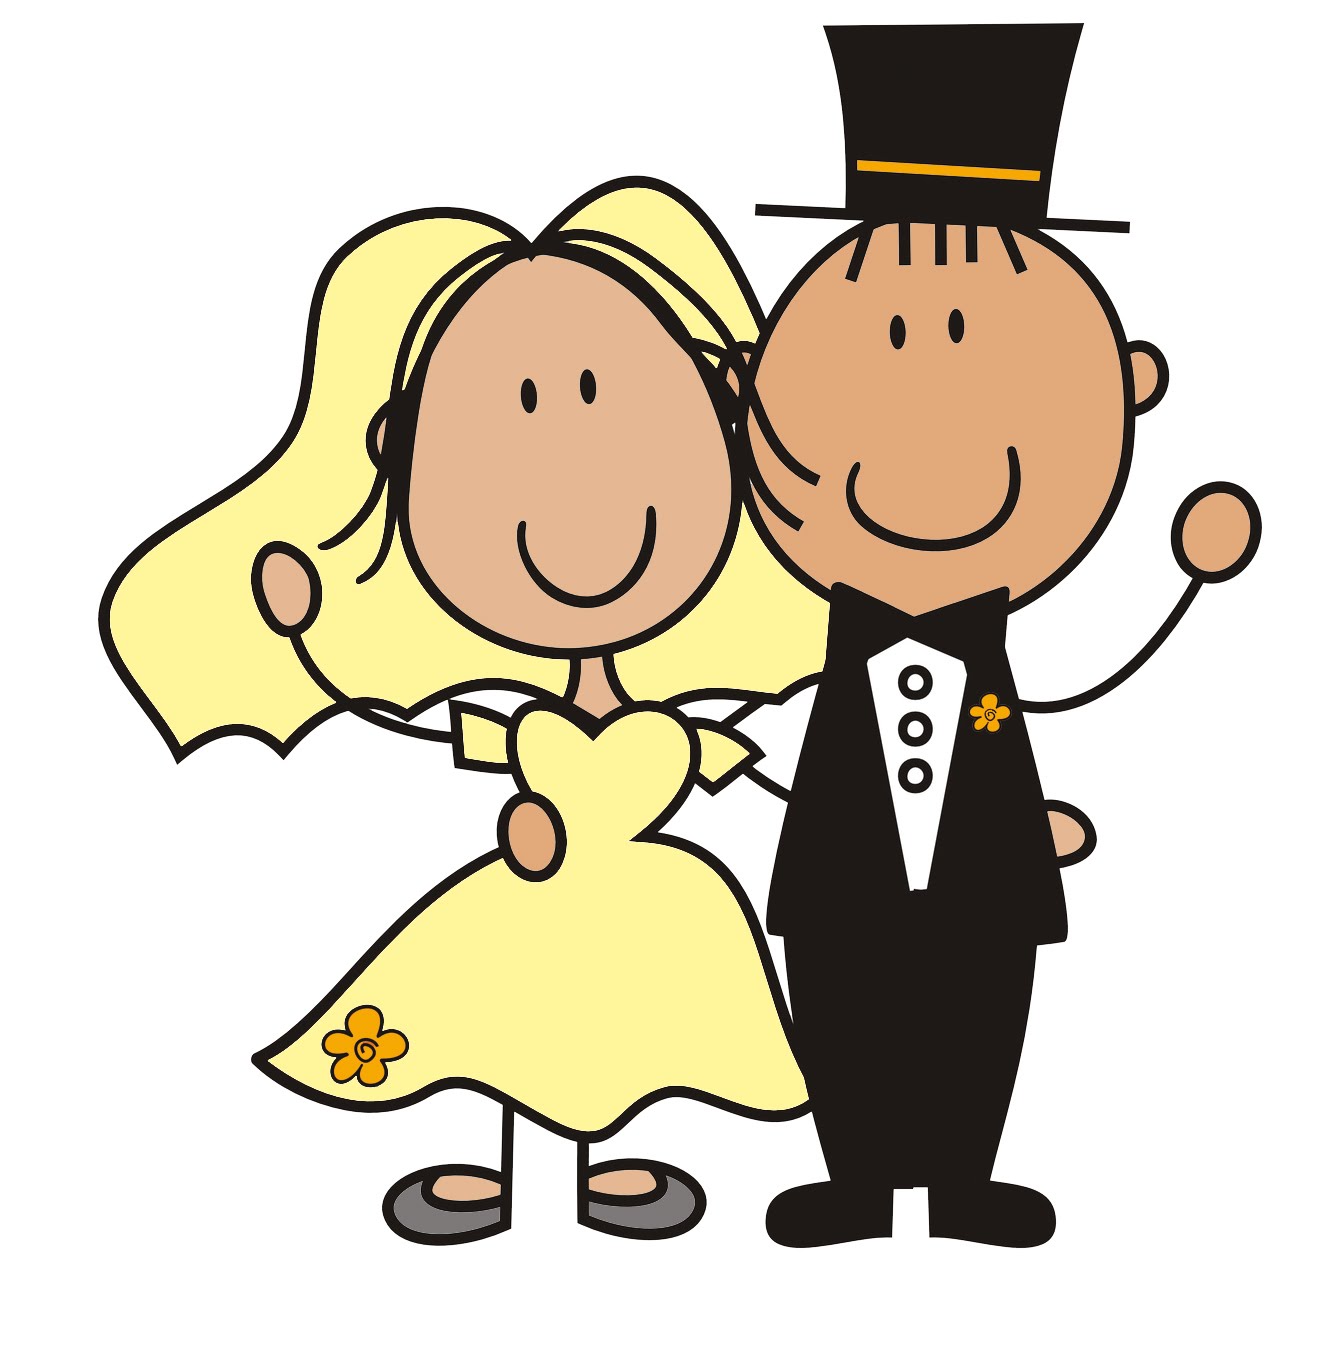 Wedding Coloring Pages For Kid's Enjoyment